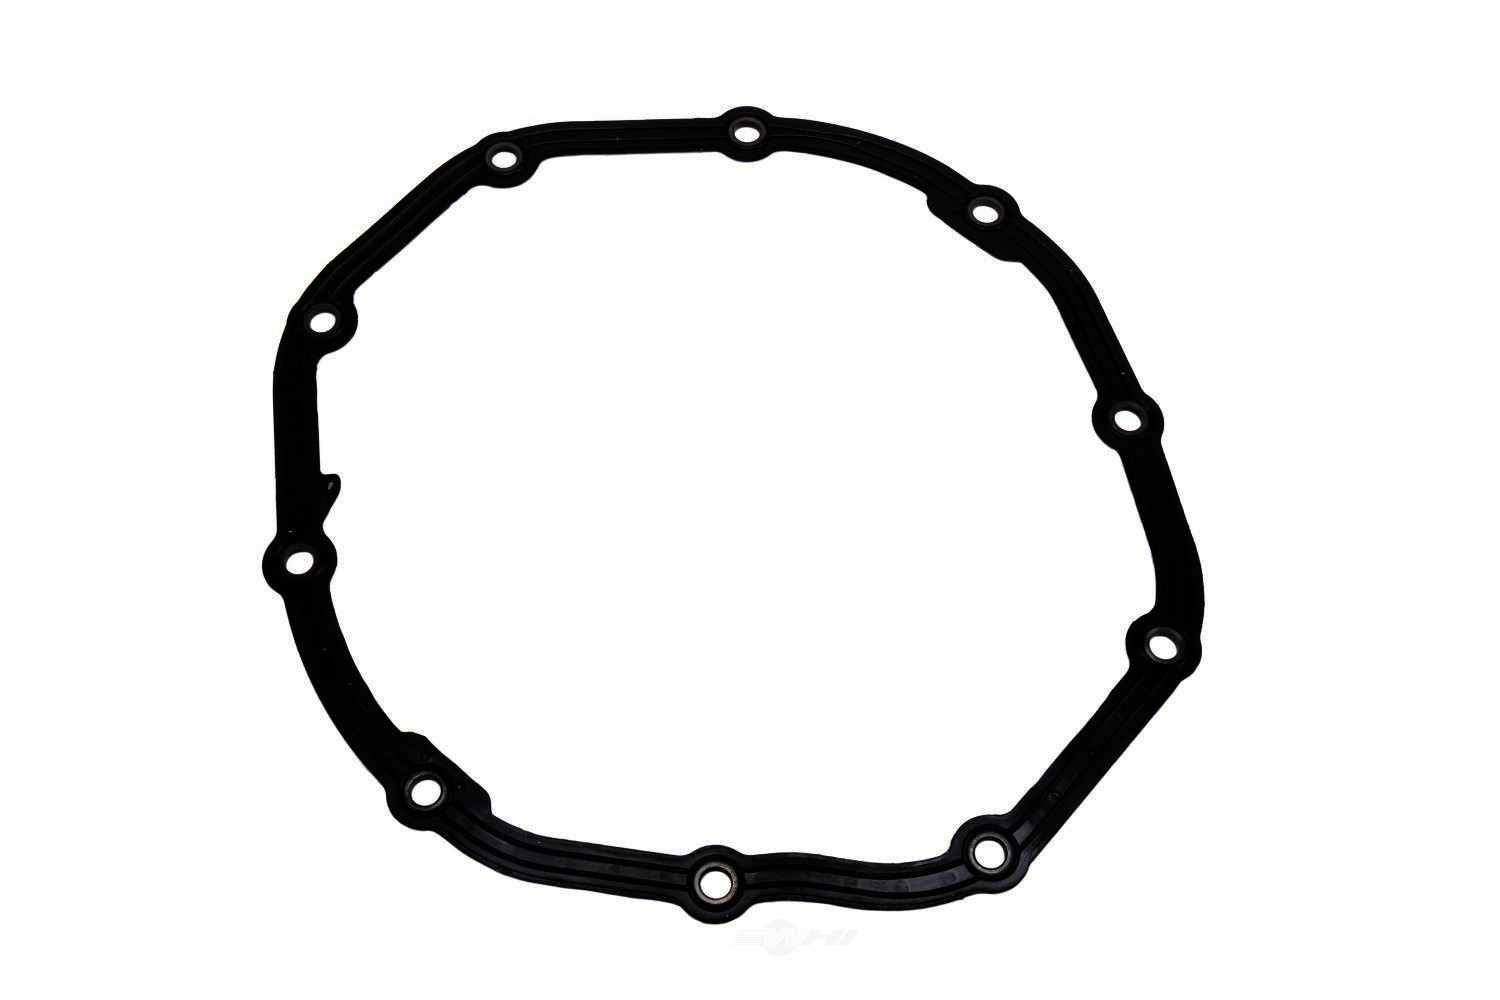 GM GENUINE PARTS - Differential Cover Gasket - GMP 12479020